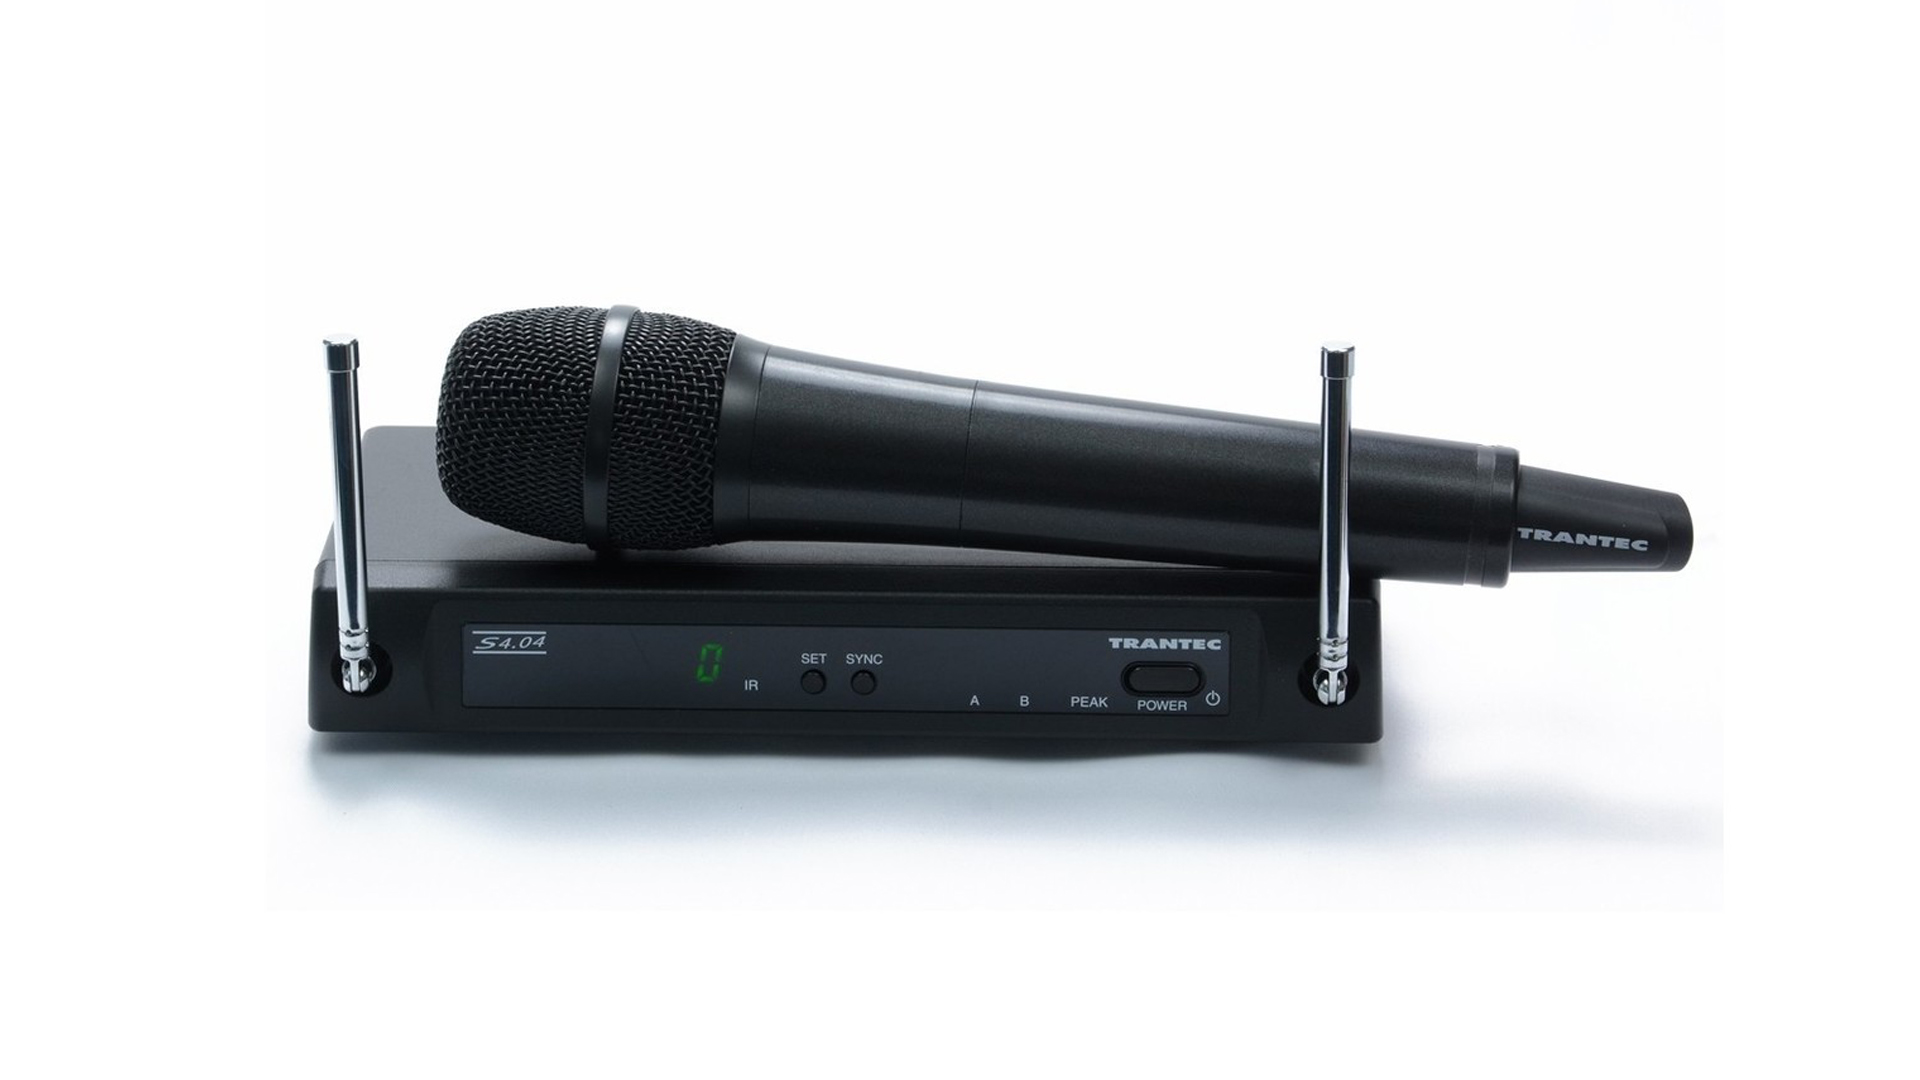 Hire Trantec S4.04 handheld radio microphone in Cardiff, Newport, Swansea, Carmarthenshire, Pembrokeshire, South West Wales